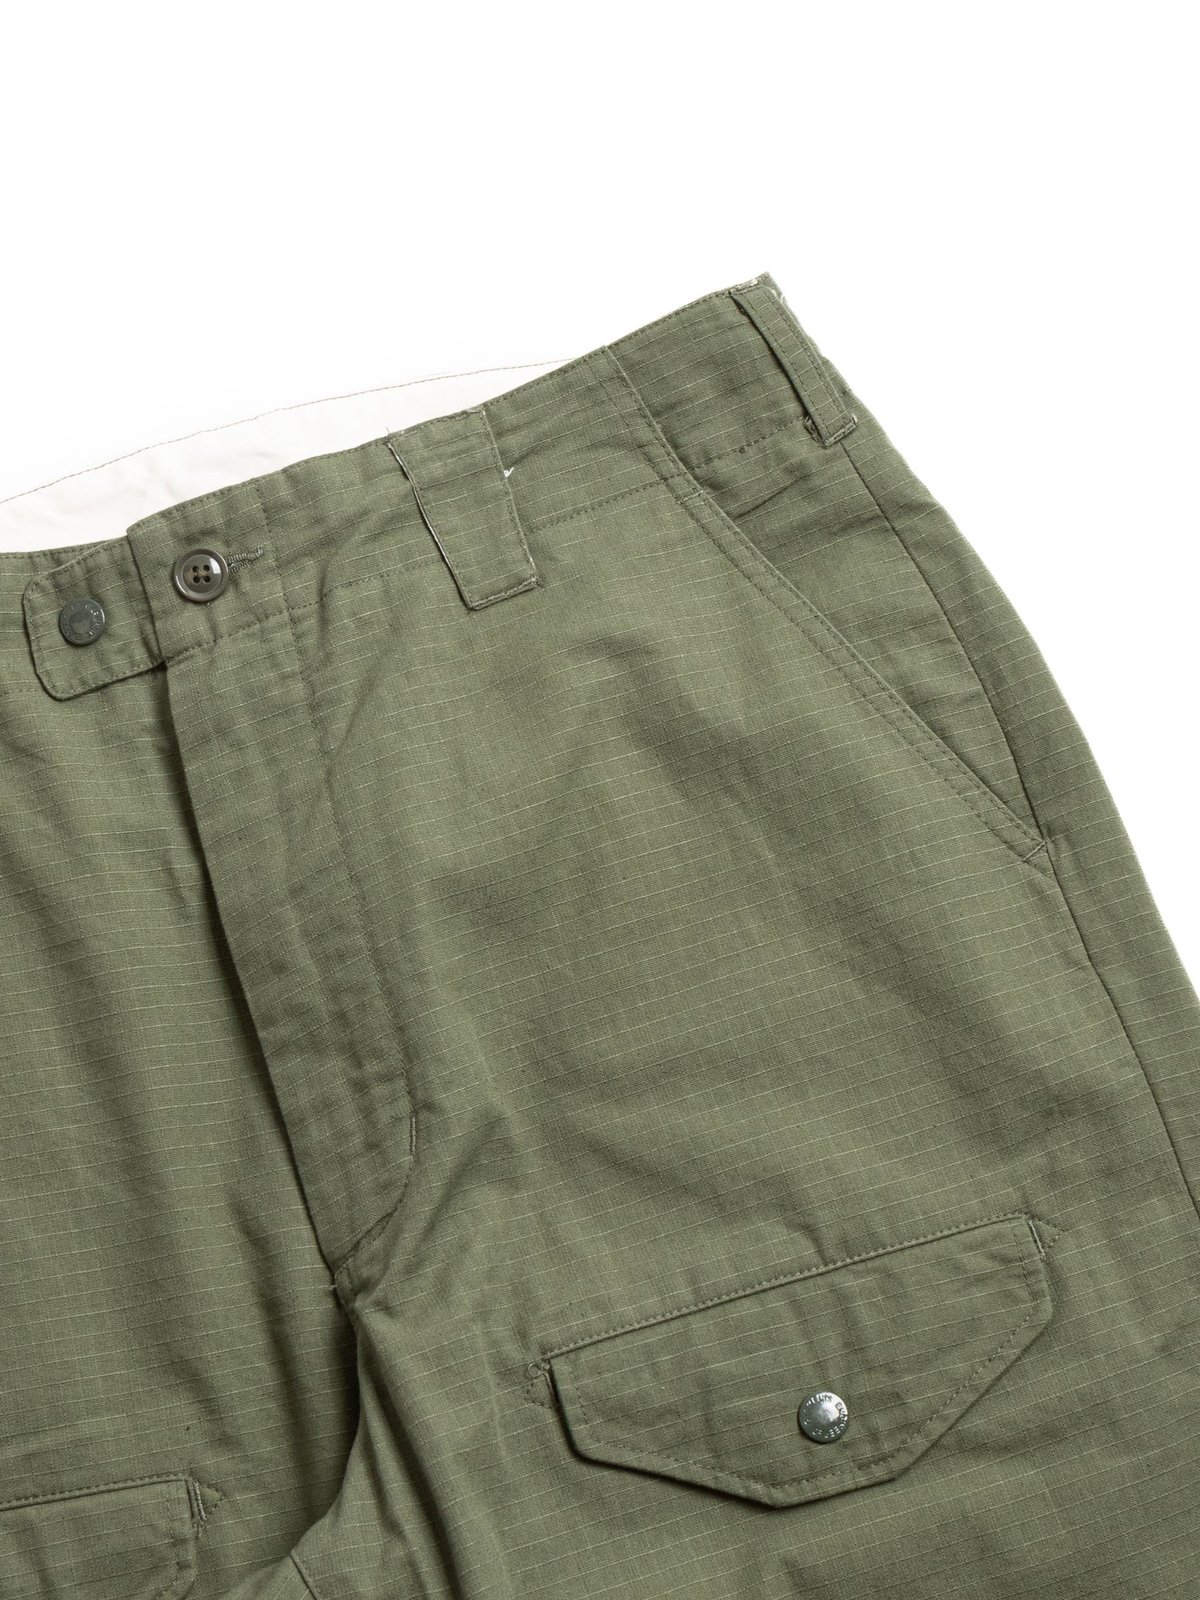 AIRBORNE PANT OLIVE COTTON RIPSTOP - Image 2